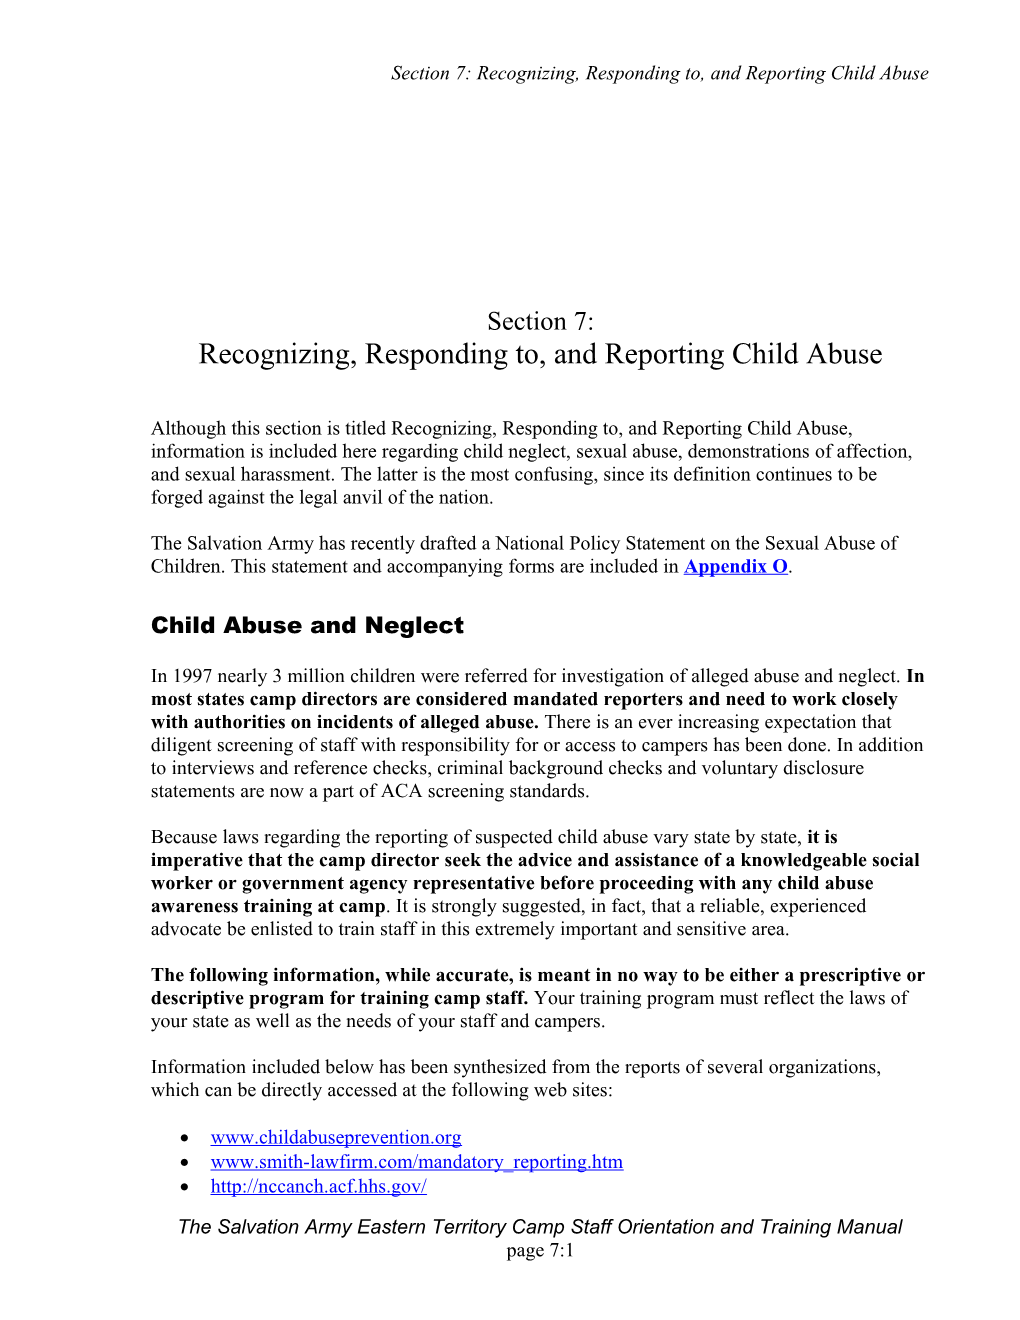 Section 7: Recognizing, Responding To, and Reporting Child Abuse